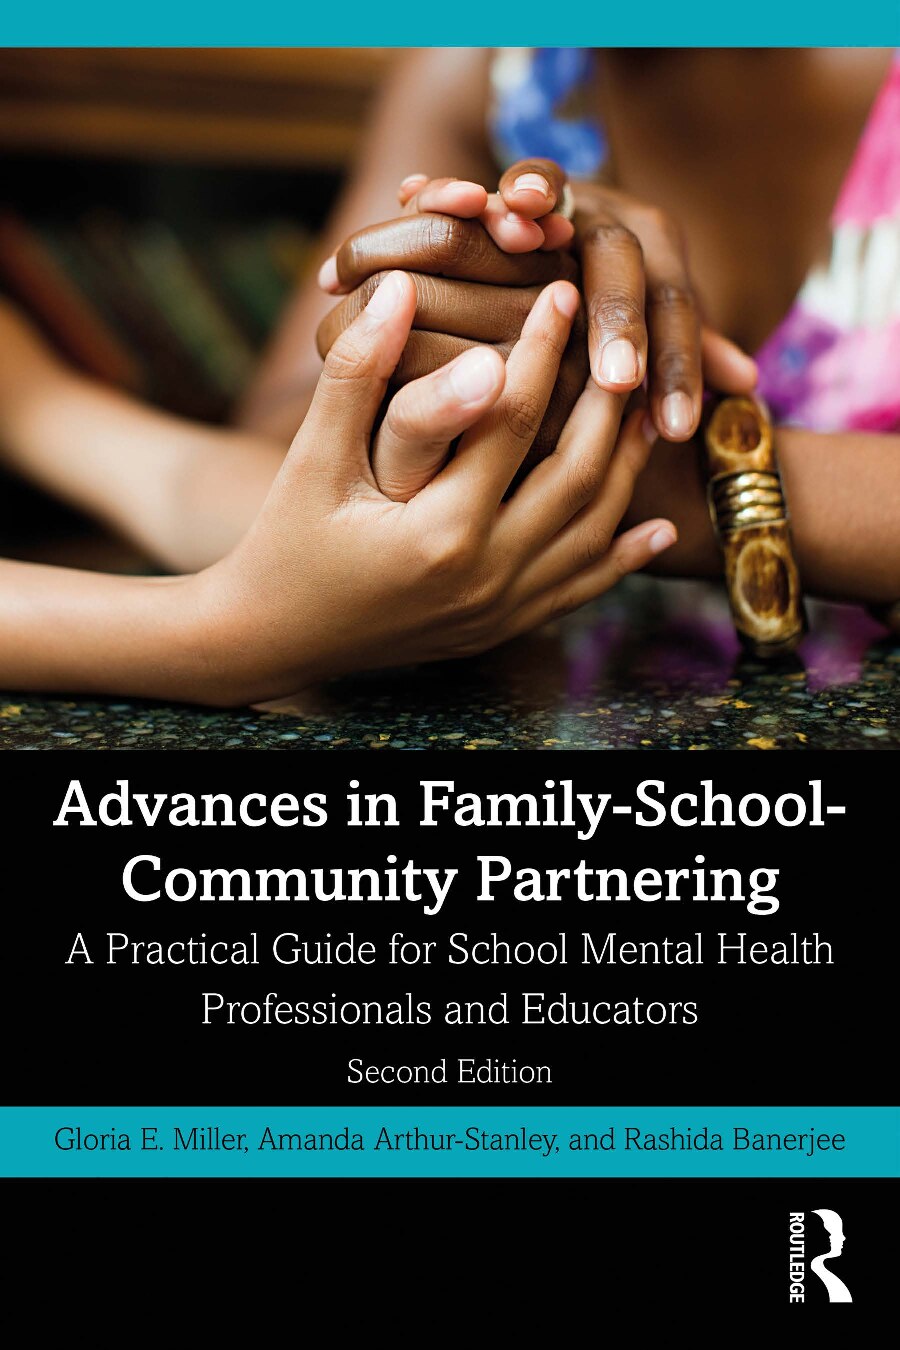 Advances in Family-School-Community Partnering; A Practical Guide for School Mental Health Professionals and Educators; Second Edition